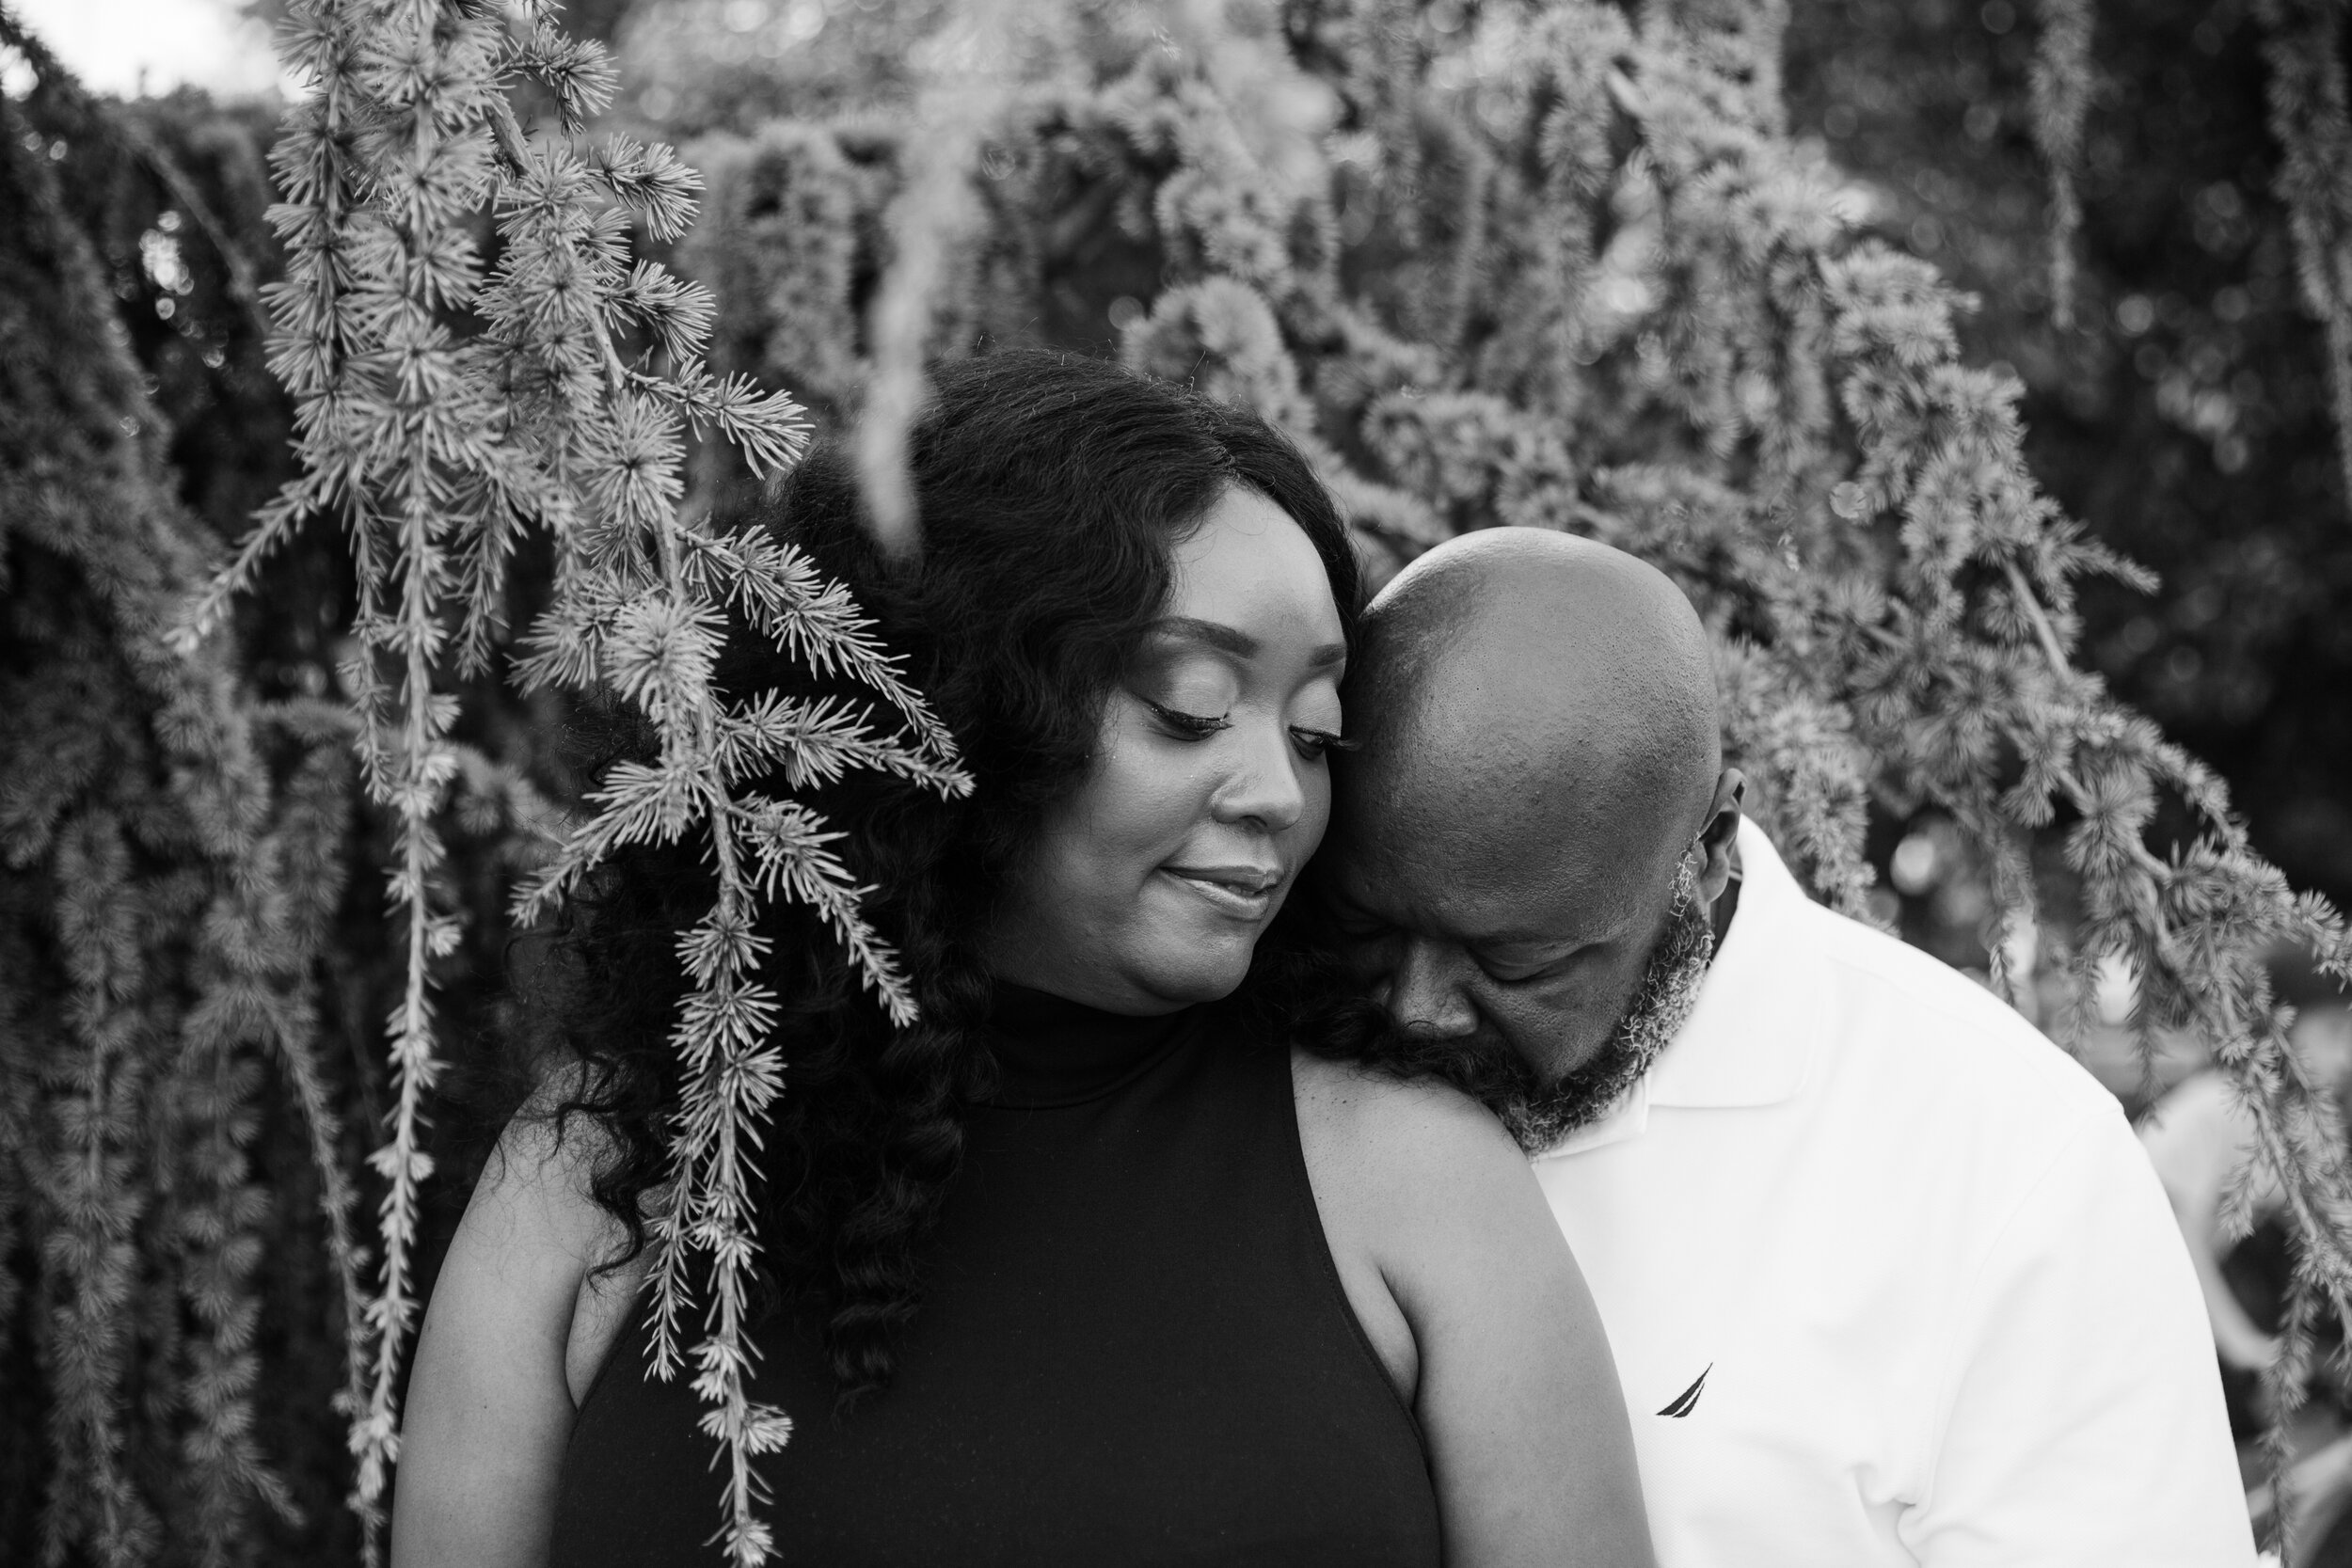 Patterson Park Engagement Session with Black Photographers Megapixels media in Baltimore Maryland (12 of 32).jpg